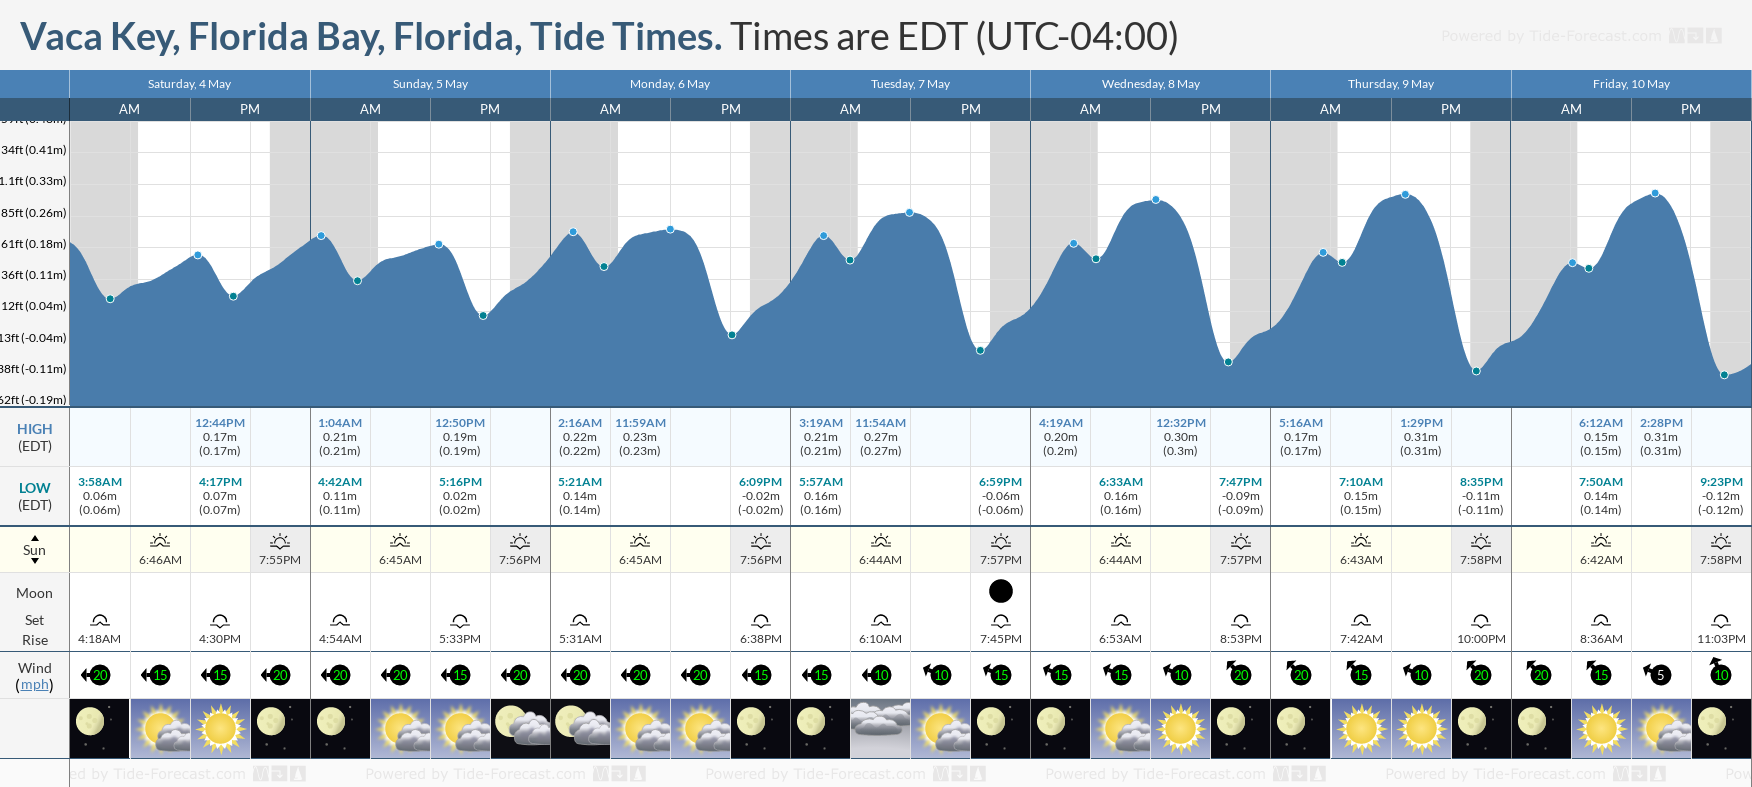 Vaca Key, Florida Bay, Florida Tide Chart including high and low tide tide times for the next 7 days